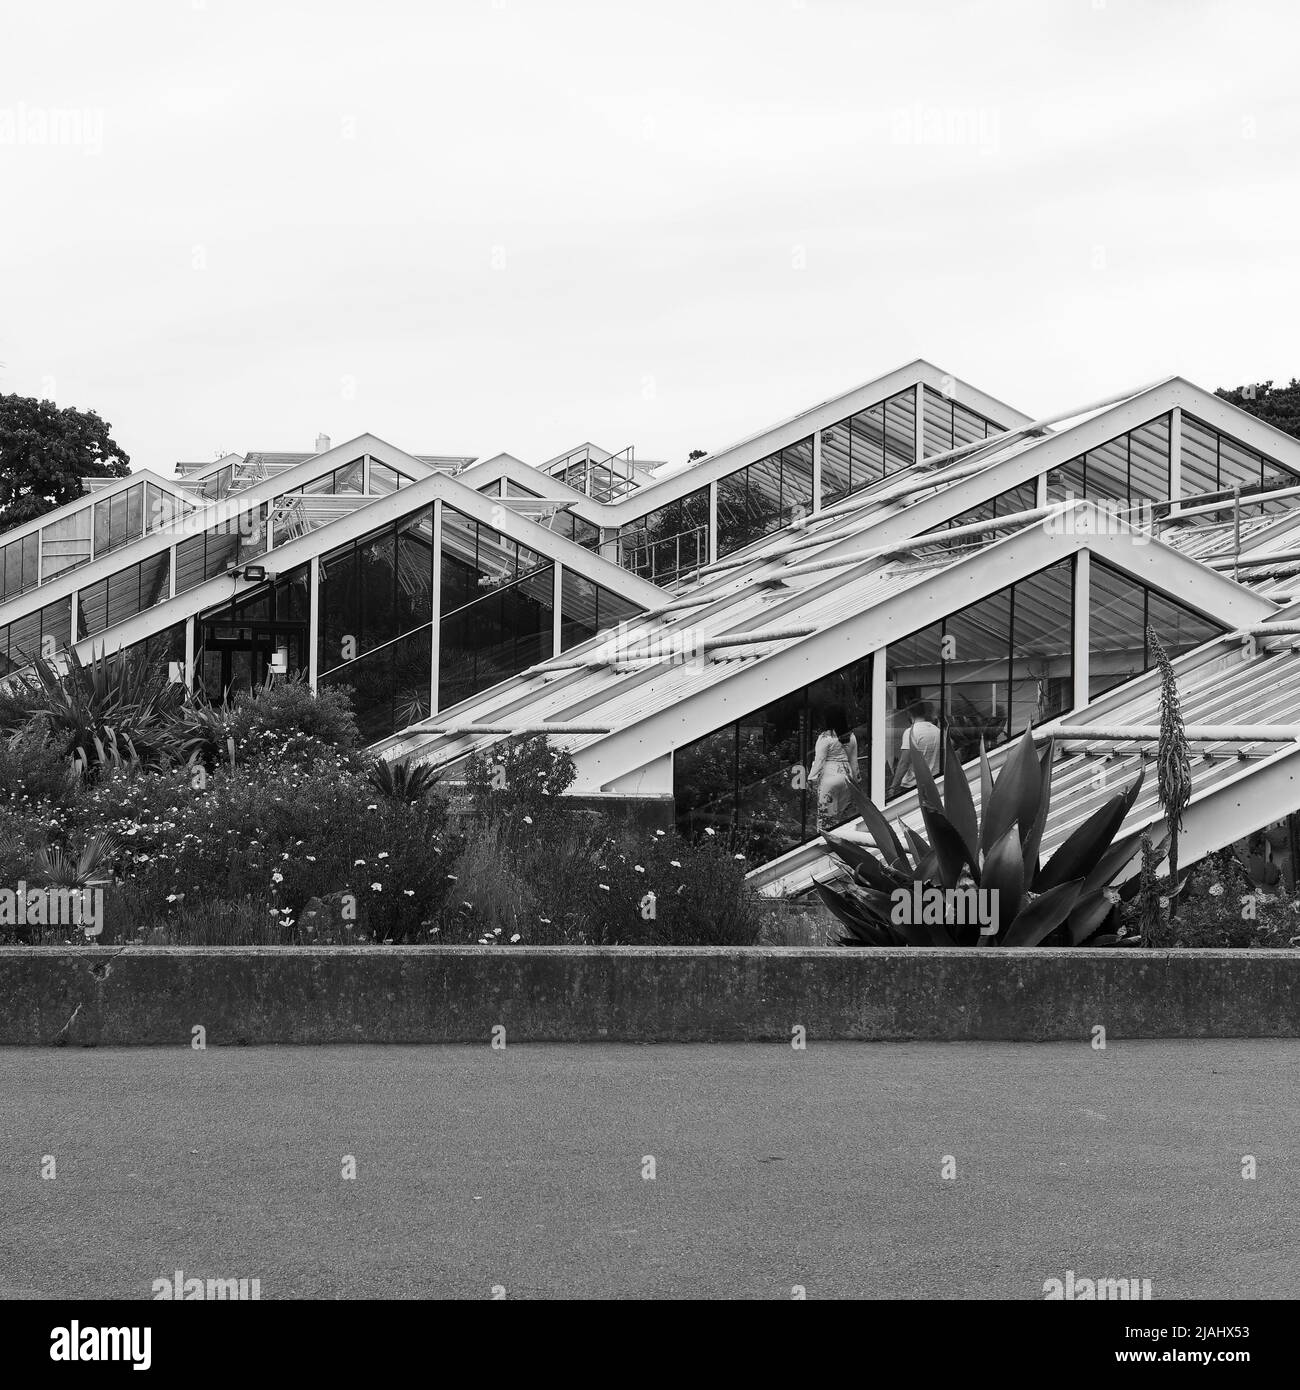 Richmond, Greater London, England, May 18 2022: Royal Botanic Gardens Kew. Exterior of the Prince of Wales Conservatory. Stock Photo